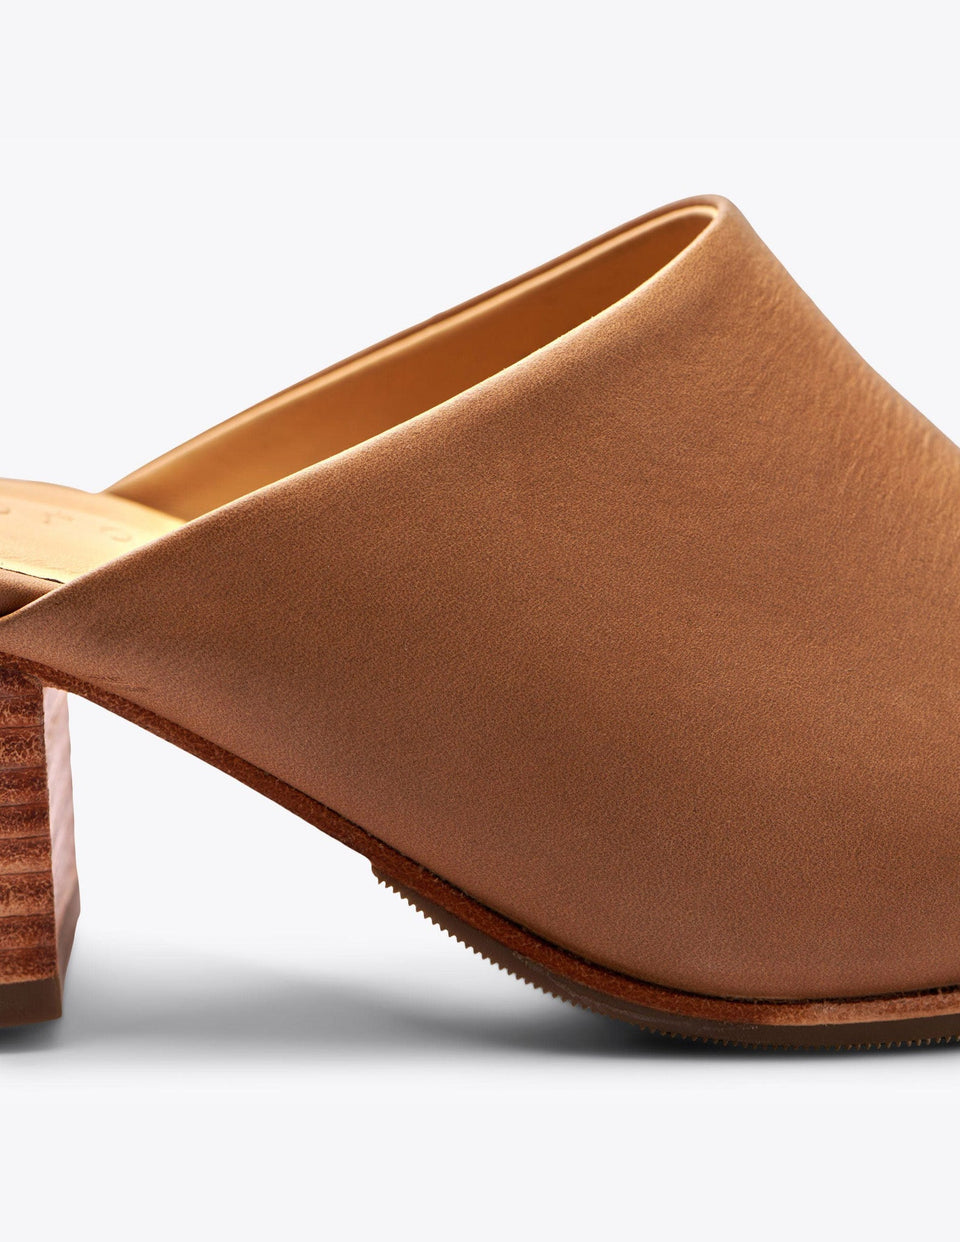 All-Day Heeled Mule - Almond